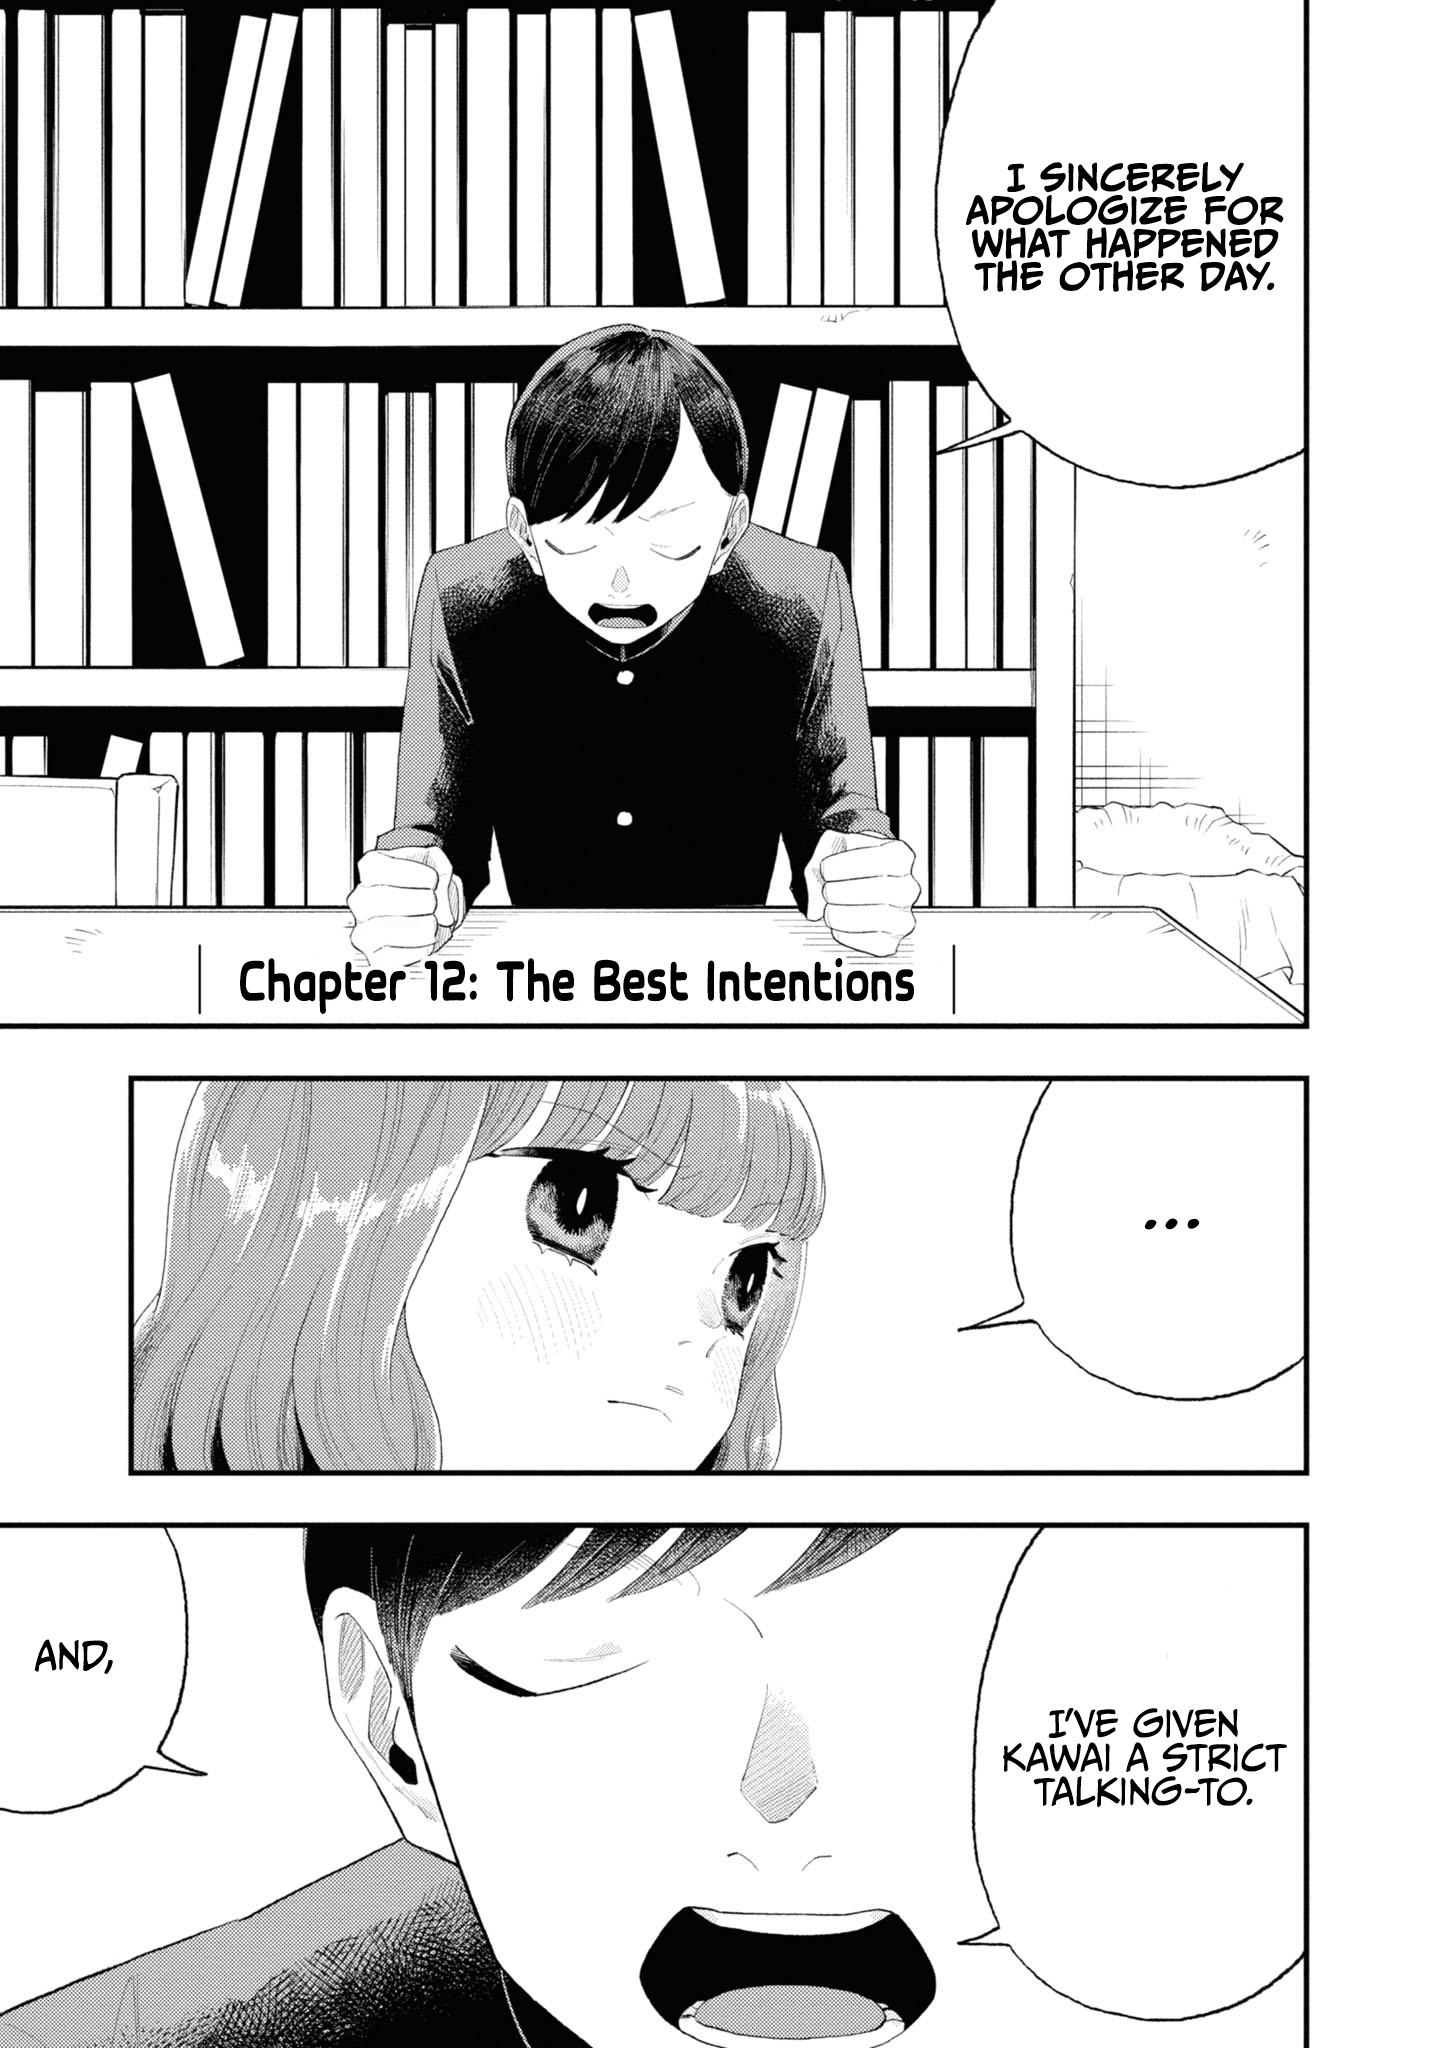 The Overly Straightforward Natsume-Kun Can't Properly Confess - Page 1